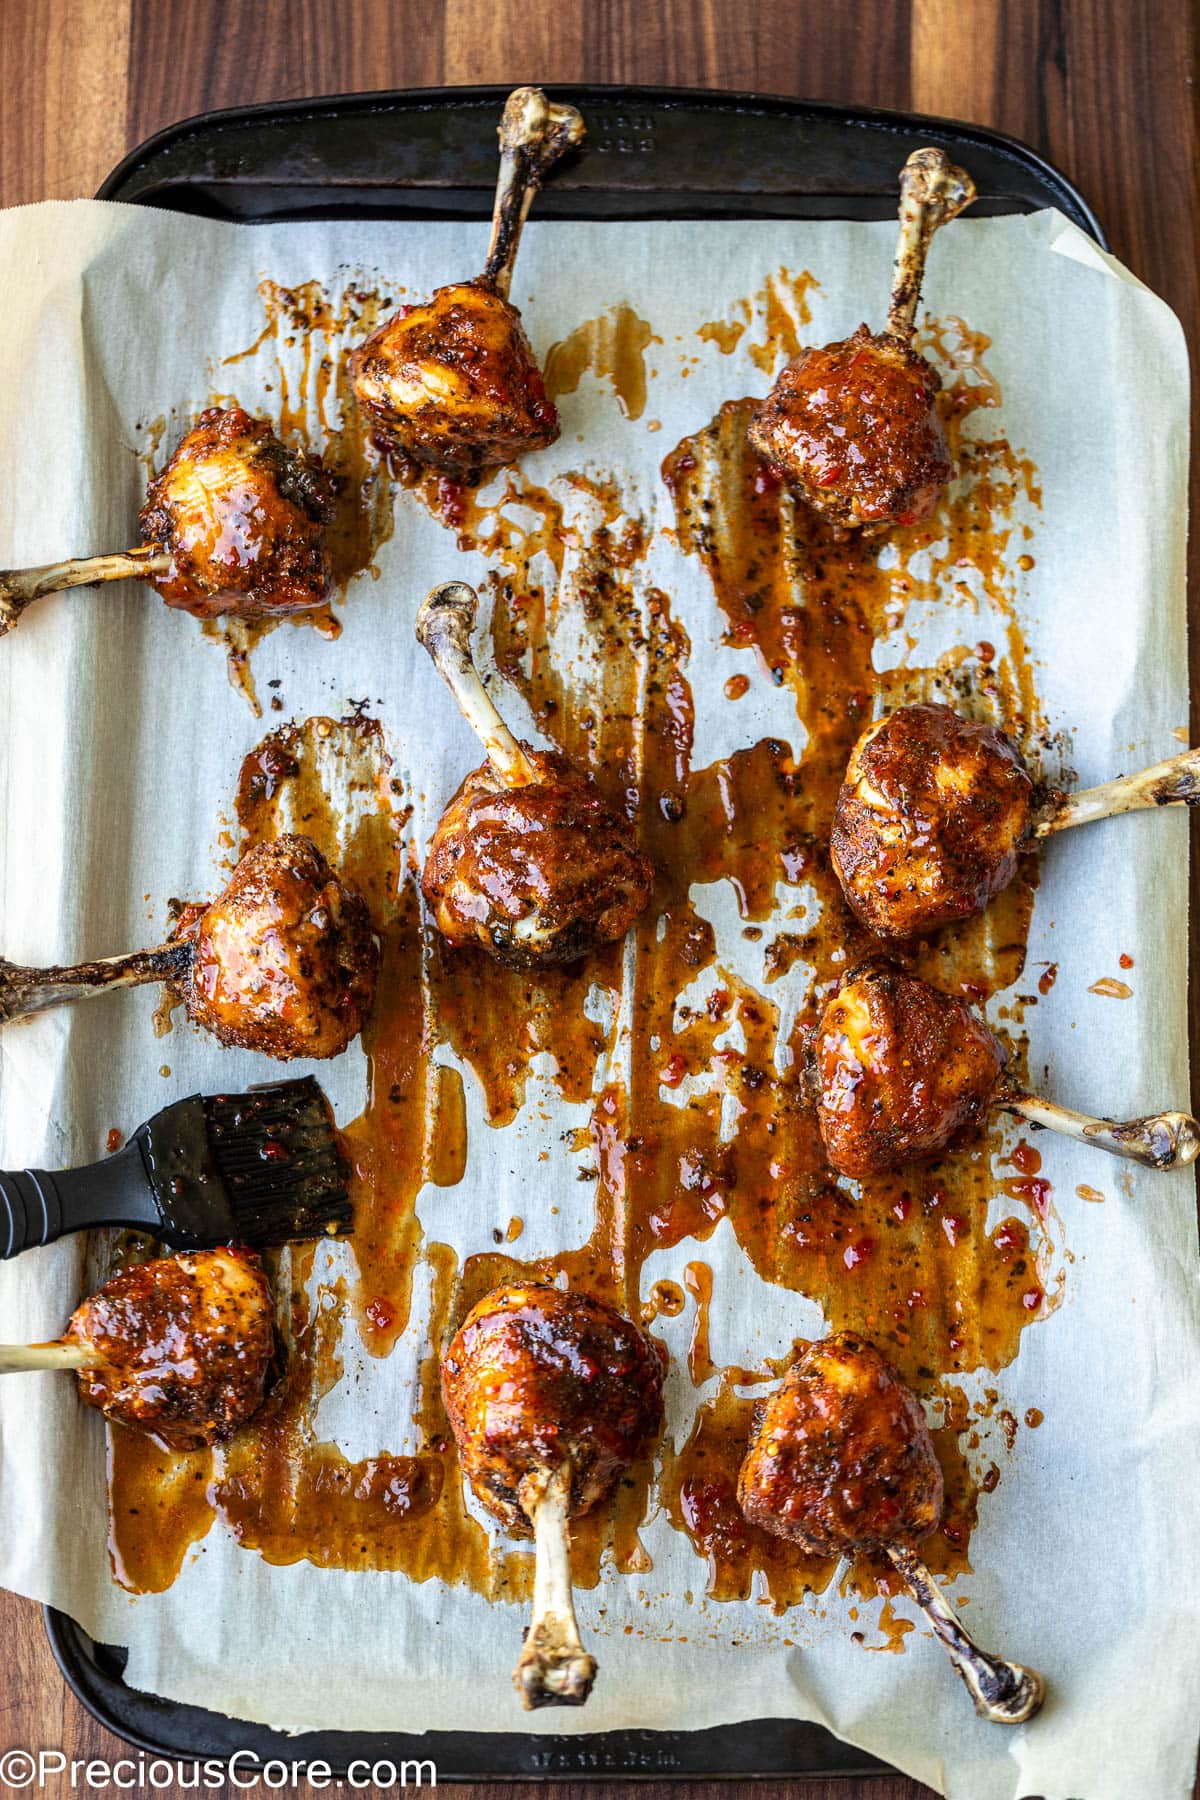 Brushing chicken lollipops with sauce.